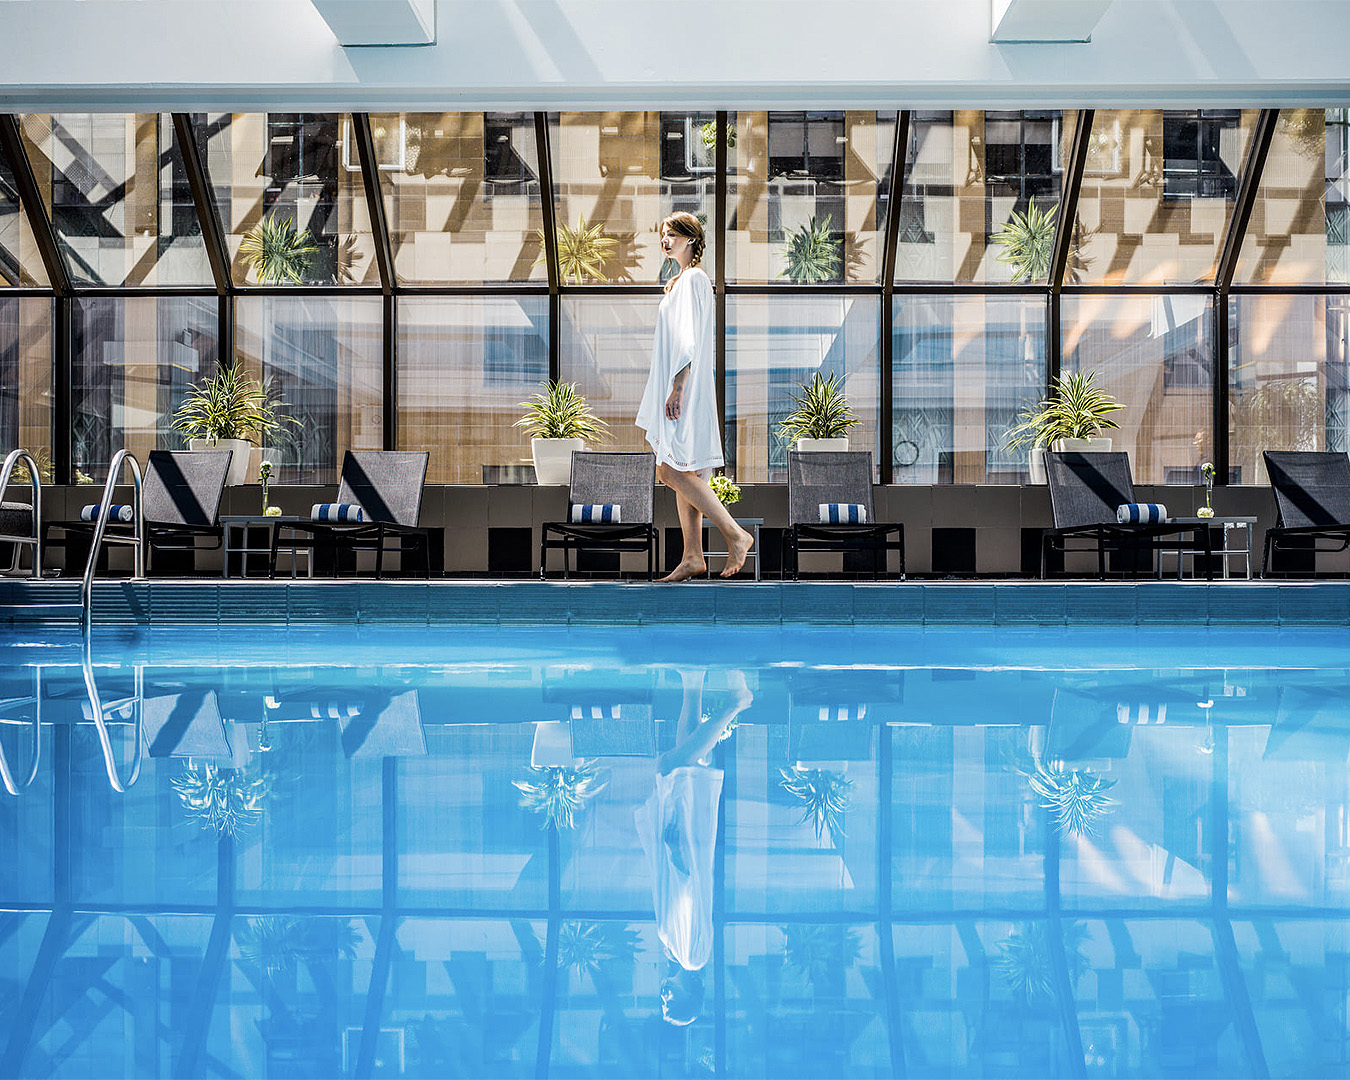 A woman walks by the large pool at the Intercontinental Hotel in Wellington, one of the best luxury hotels in New Zealand.